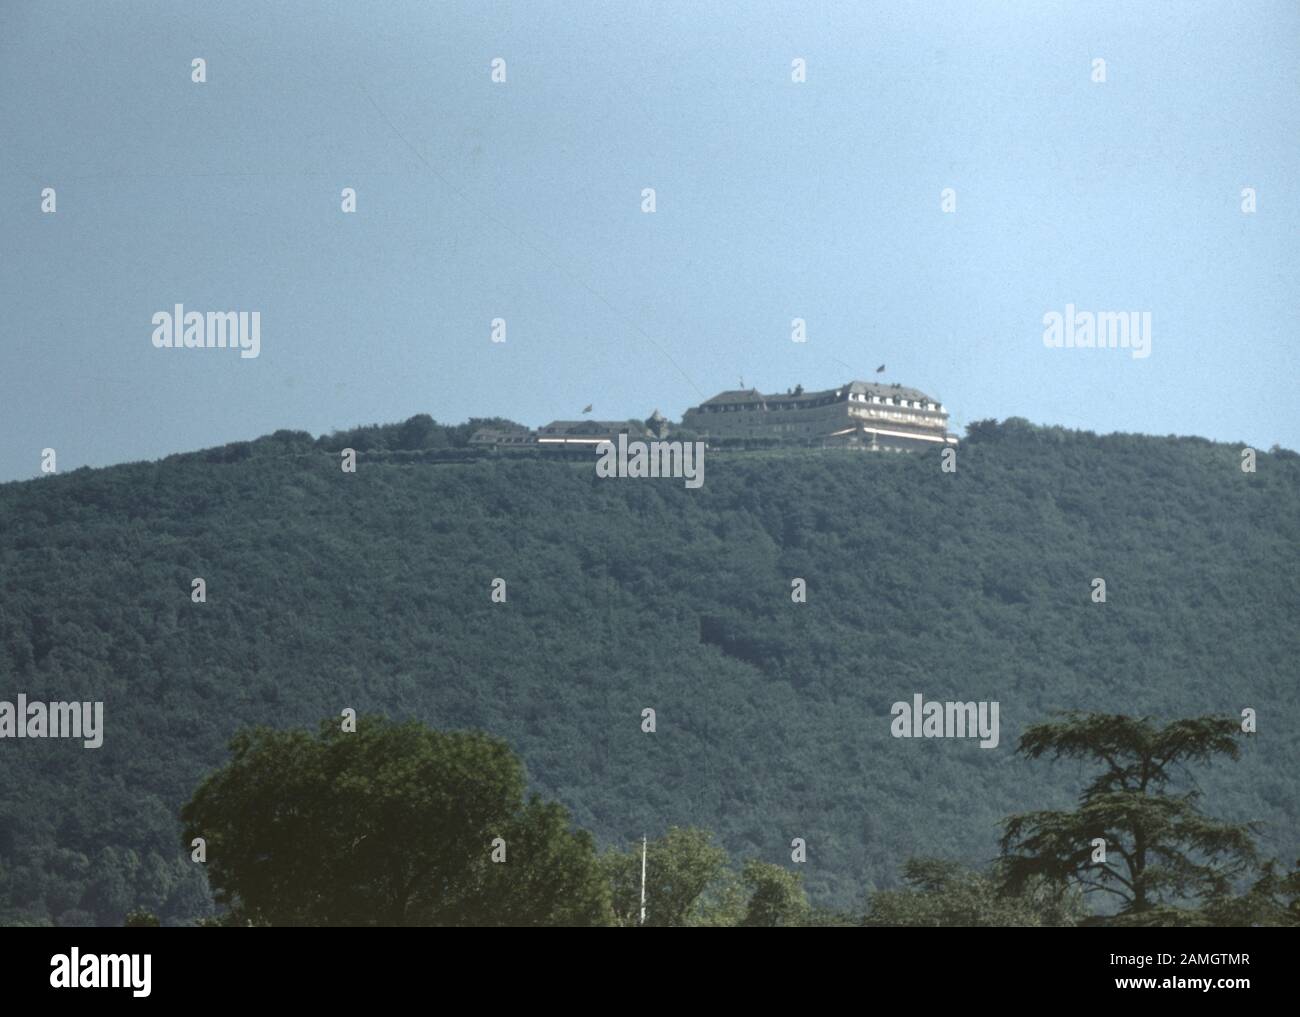 Vernacular photograph taken on a 35mm analog film transparency, believed to depict white building on top of mountain, 1965. Major topics/objects detected include Sky, Hill, Sea, Mountain, Nature and Gray Color. () Stock Photo